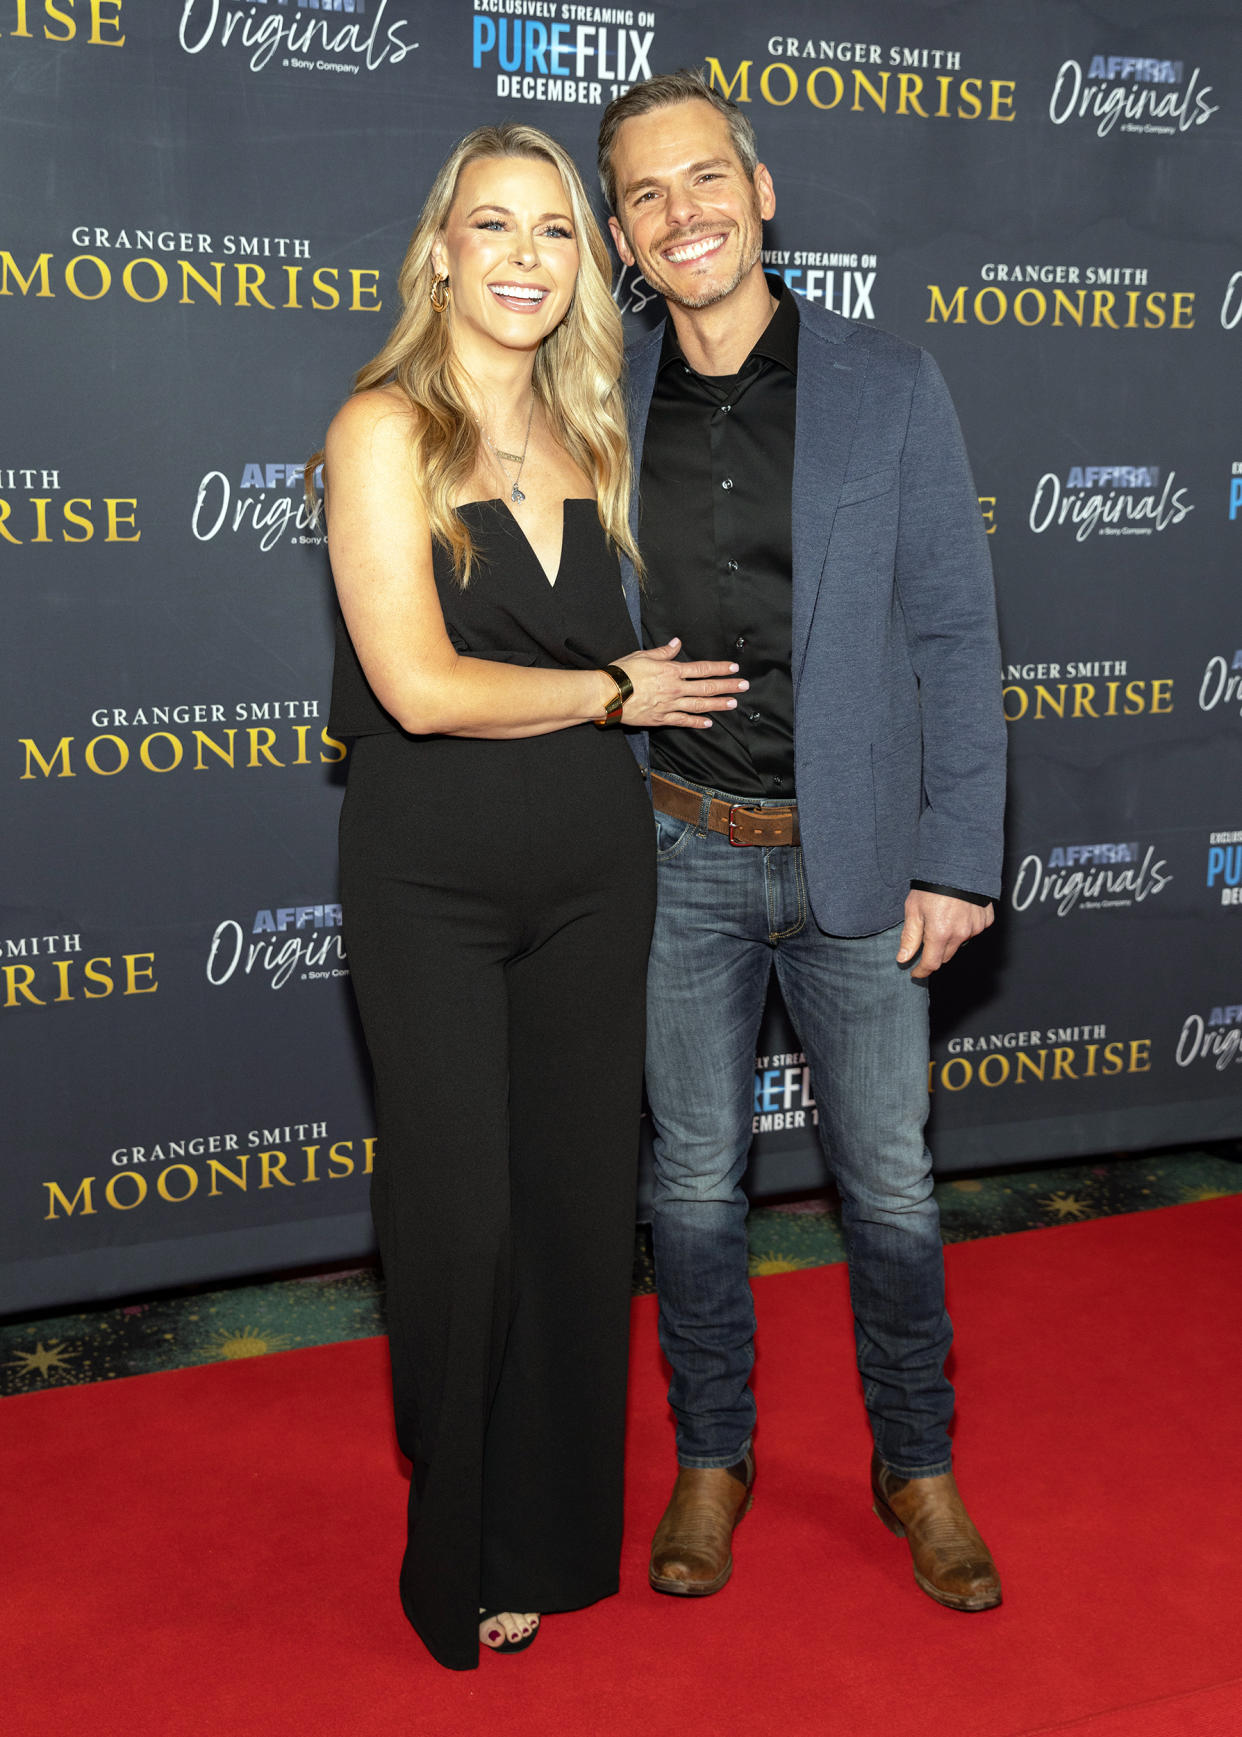 Amber Smith and Granger Smith (Rick Kern / Getty Images for PureFlix)